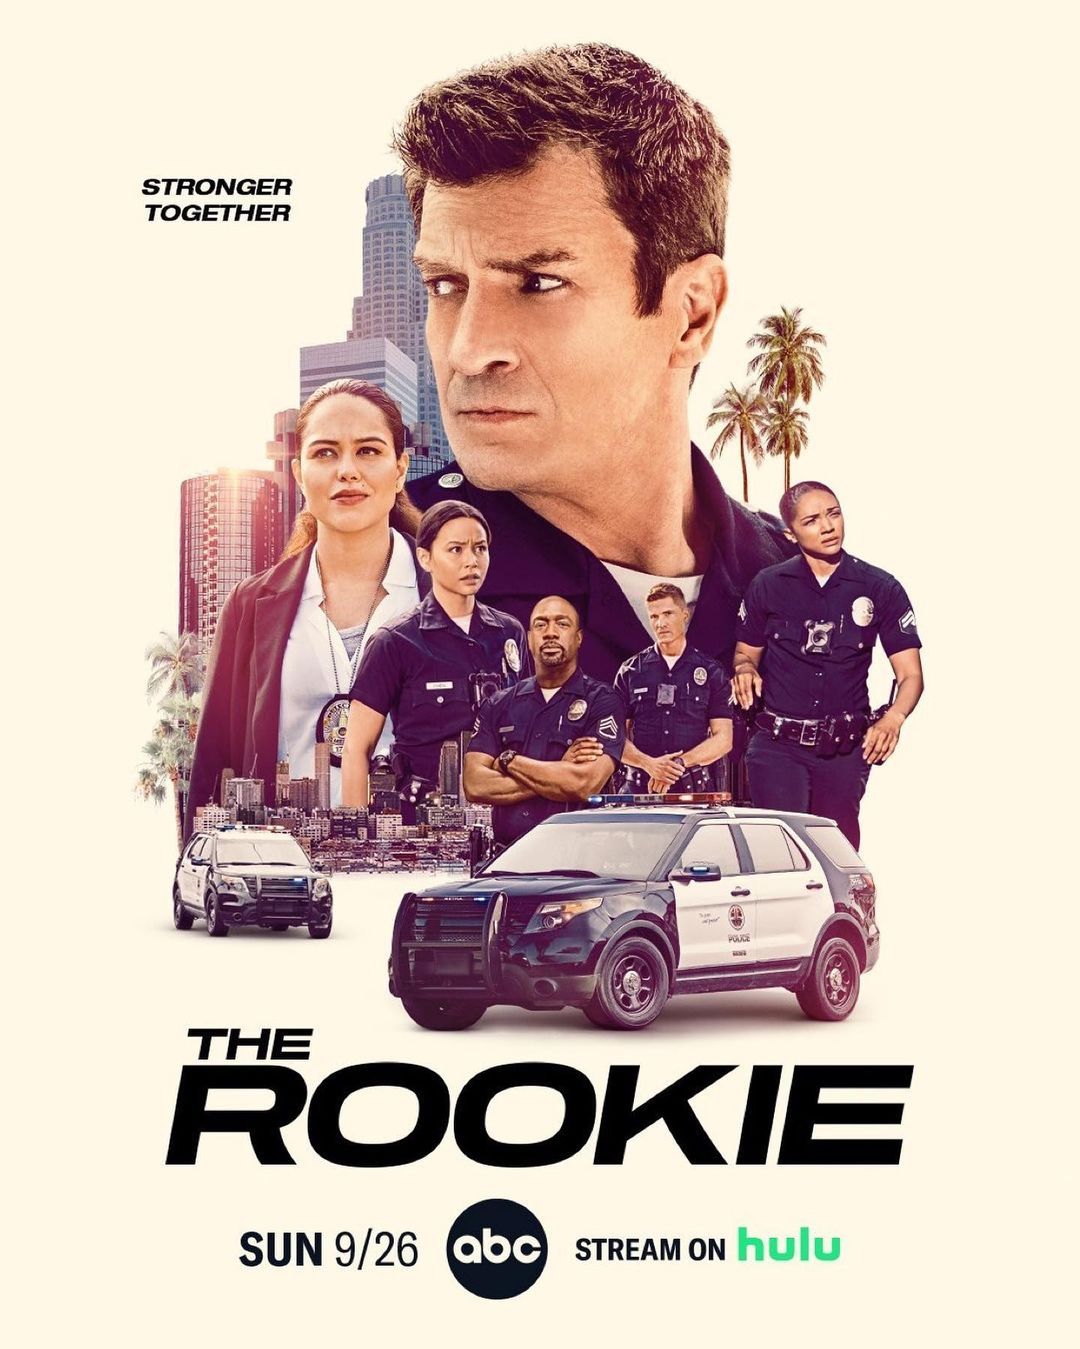 The Rookie: Life and Death | Season 4 | Episode 1